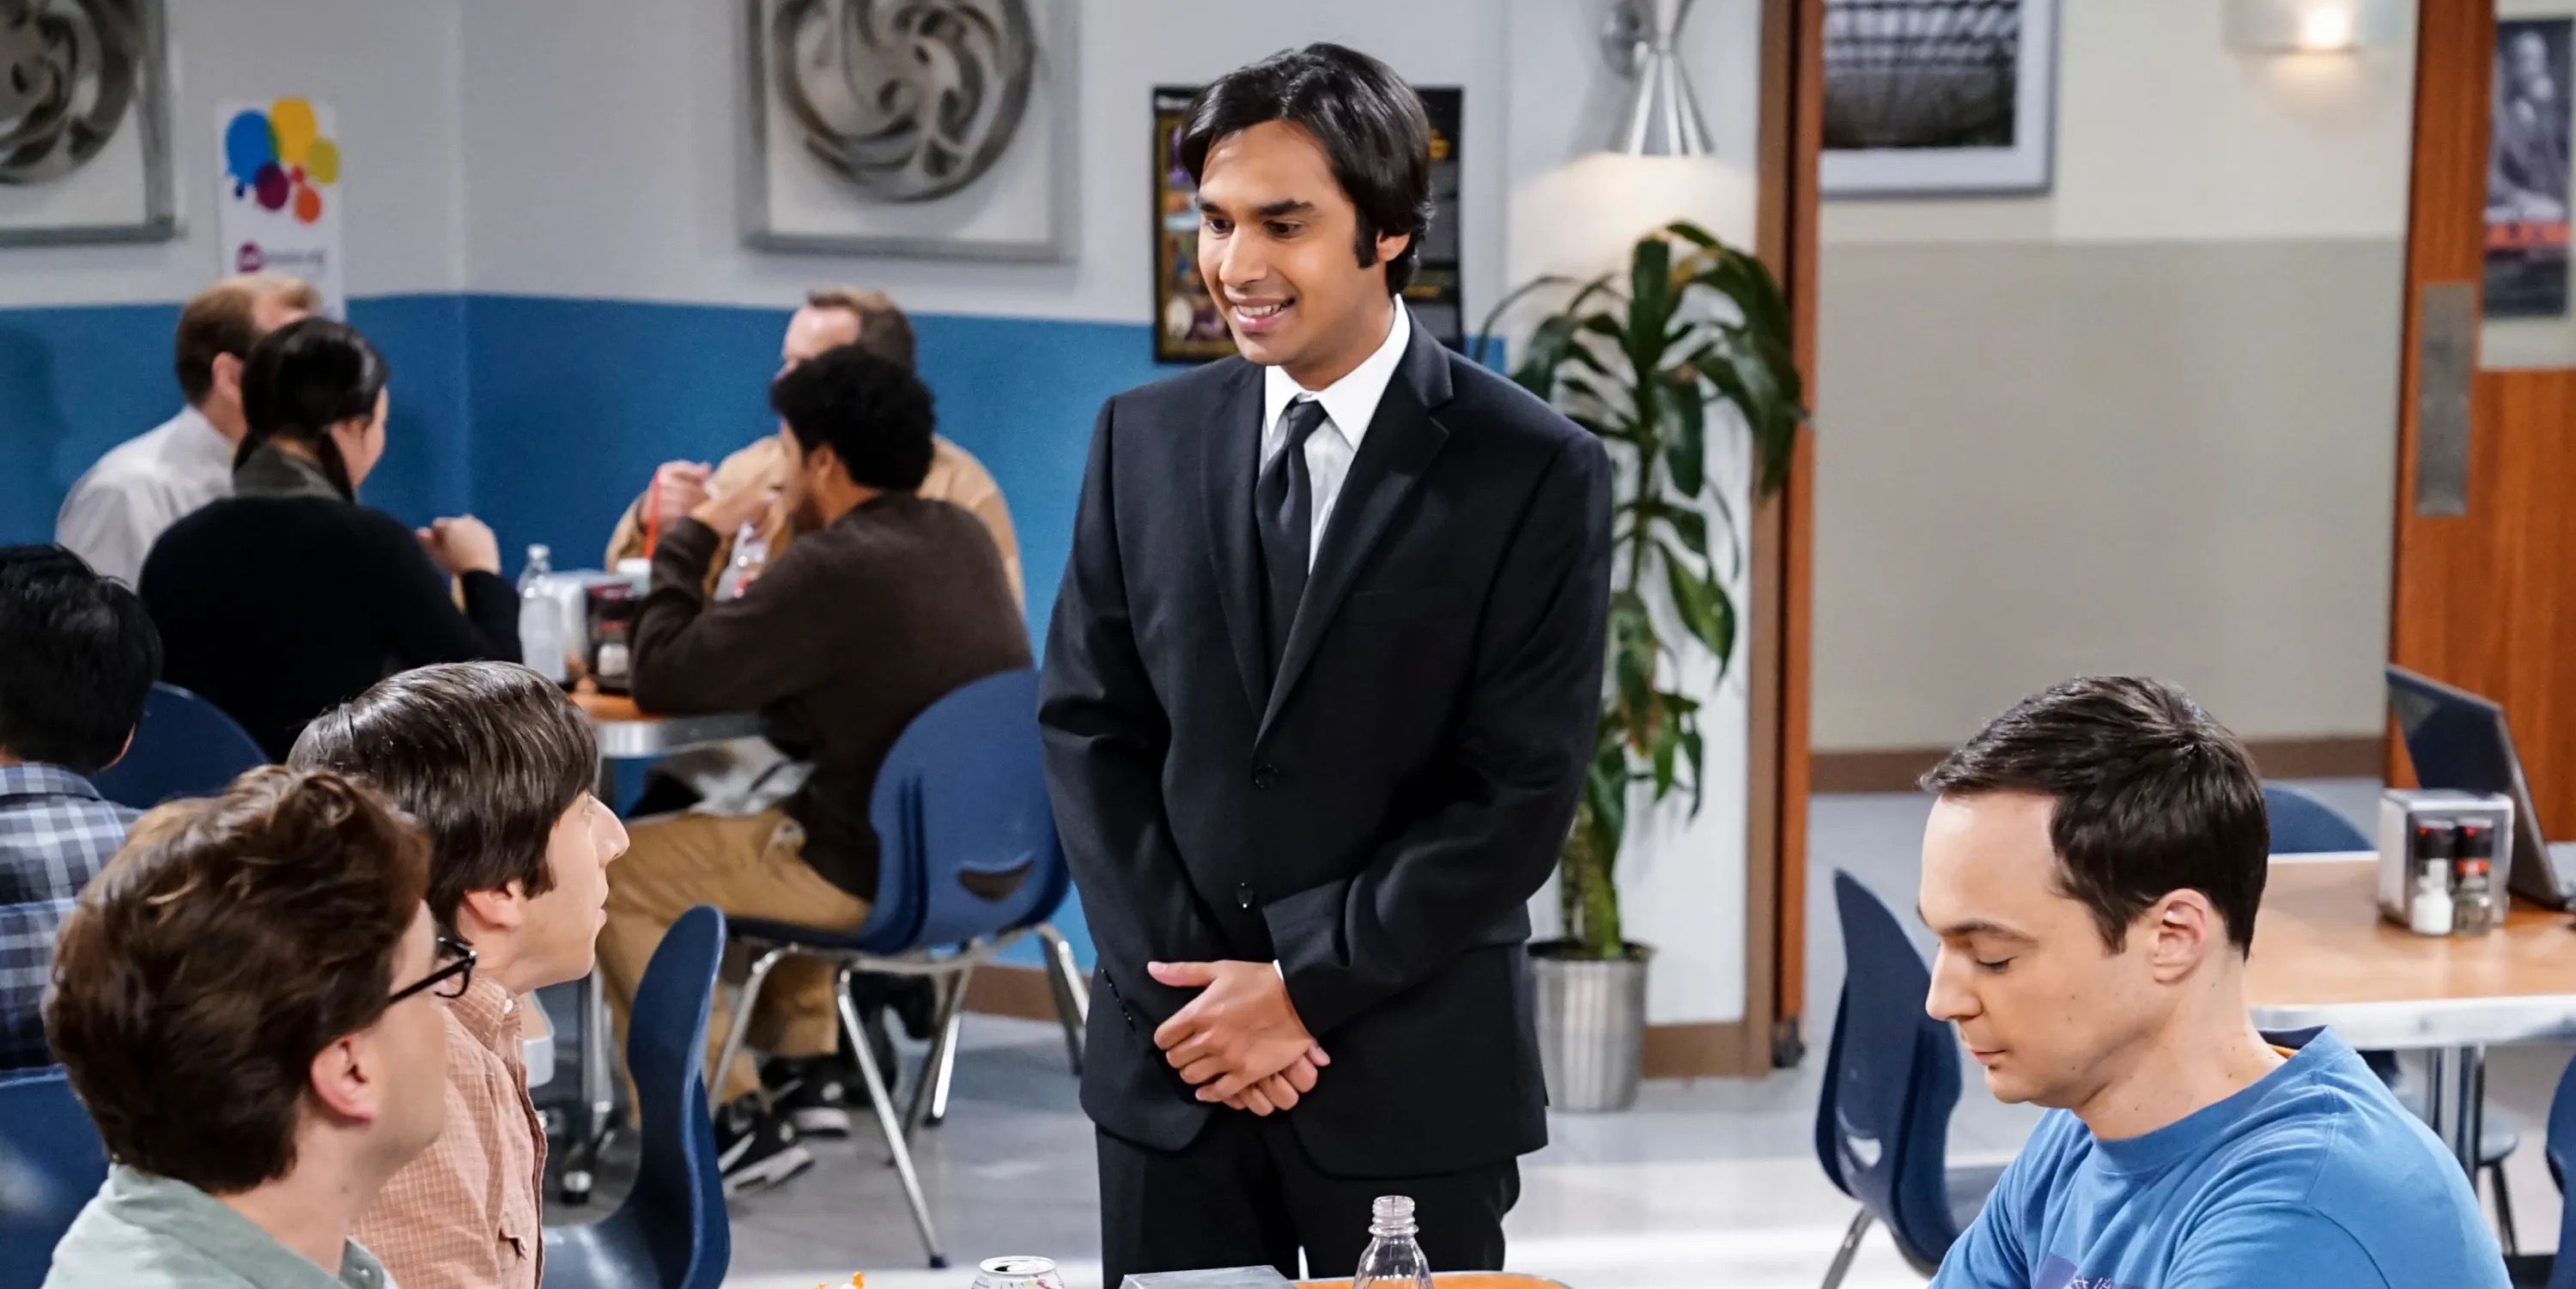 Raj at Caltech in a suit and tie